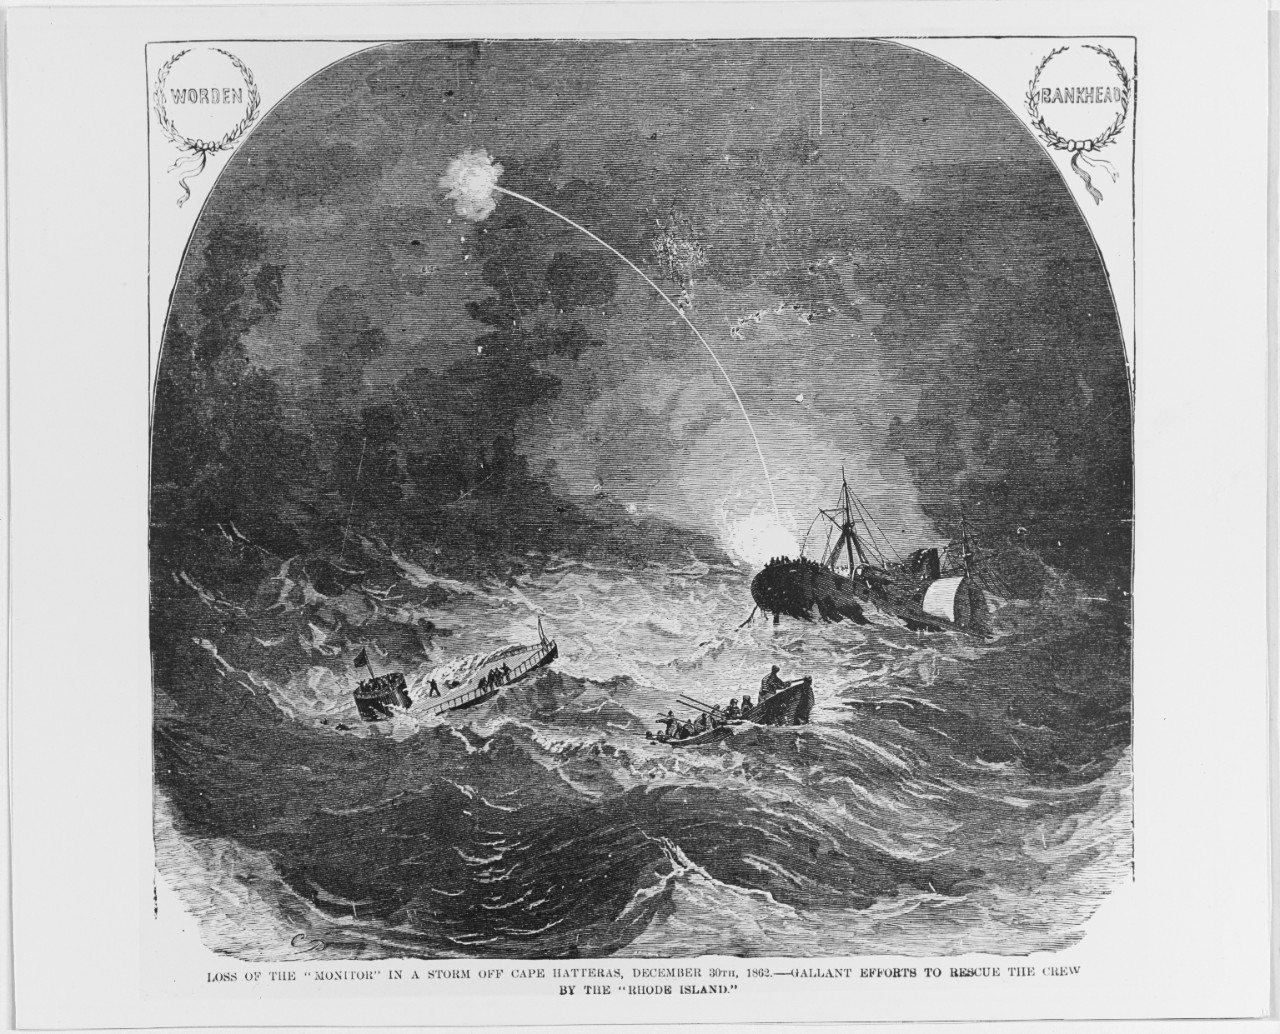 Photo #: NH 51957  &quot;Loss of the 'Monitor' in a Storm off Cape Hatteras, December 30th, 1862. -- Gallant efforts to rescue the Crew by the 'Rhode Island'.&quot;